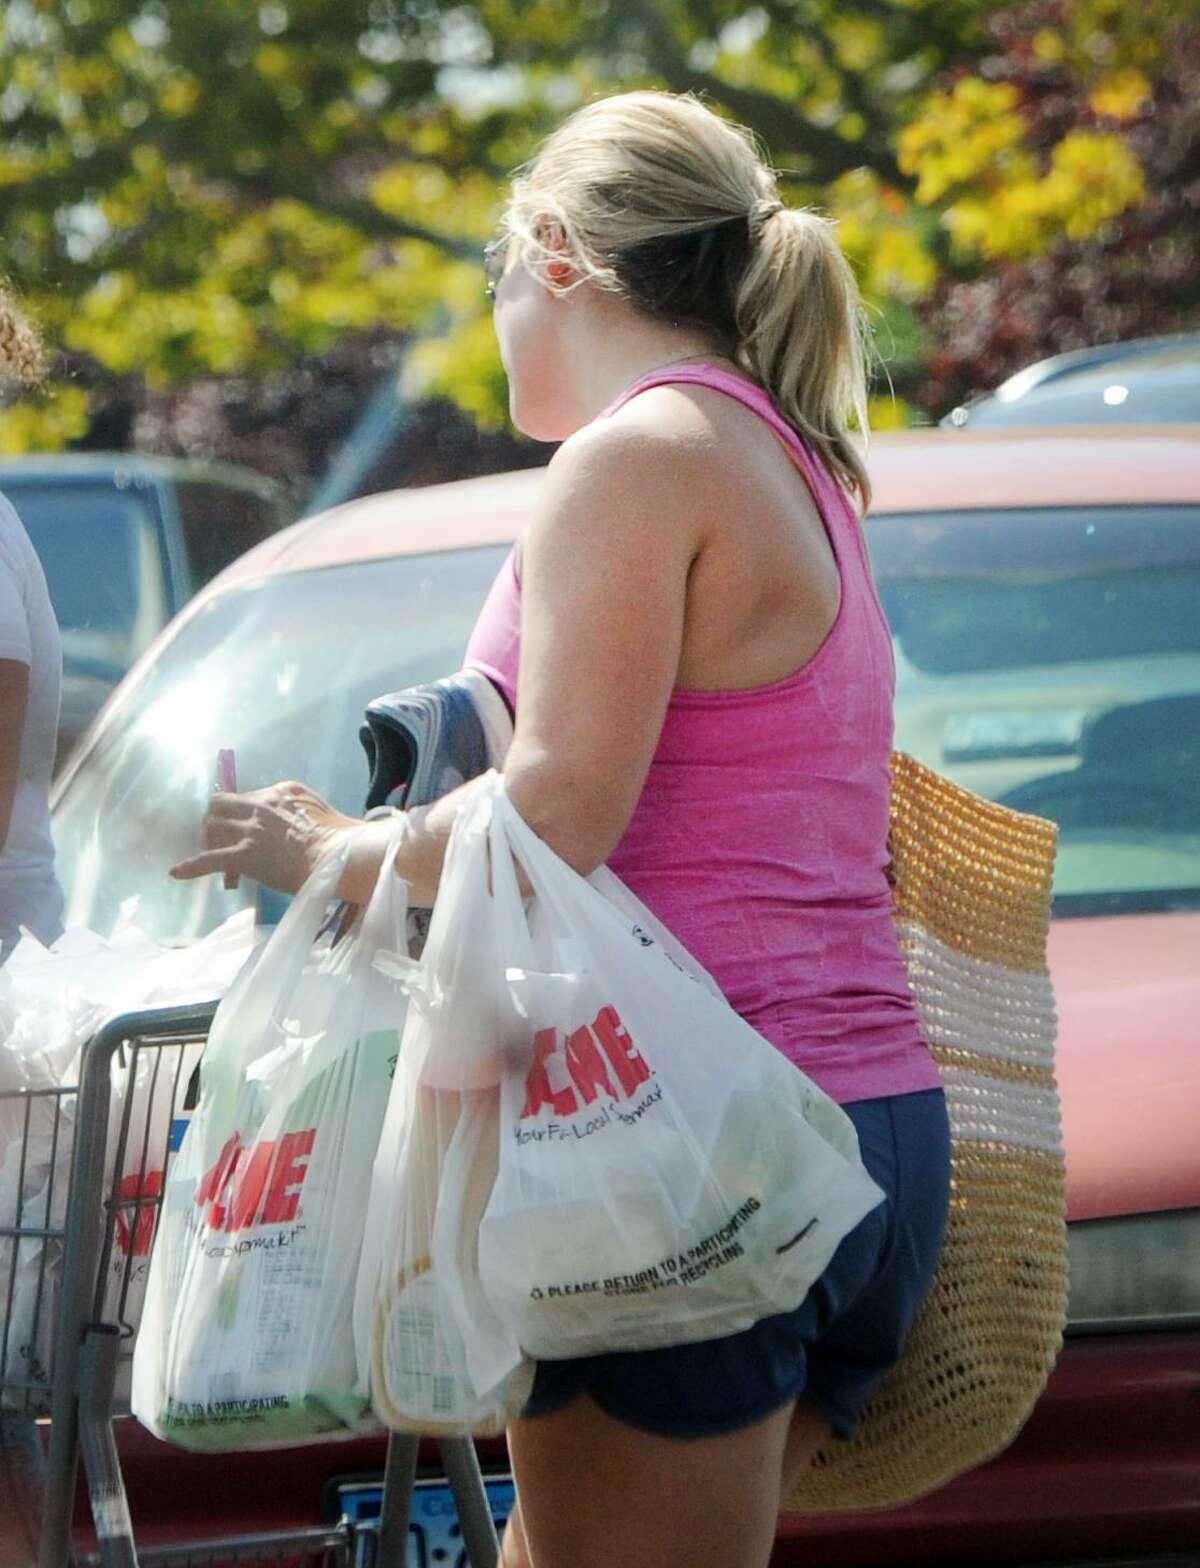 A customer carrying plastic shopping bags leaves the Riverside Commons Shopping Center in Greenwich, Conn., Tuesday, Sept. 4, 2018. A town ban on plastic bags goes into effect on Sept. 12.